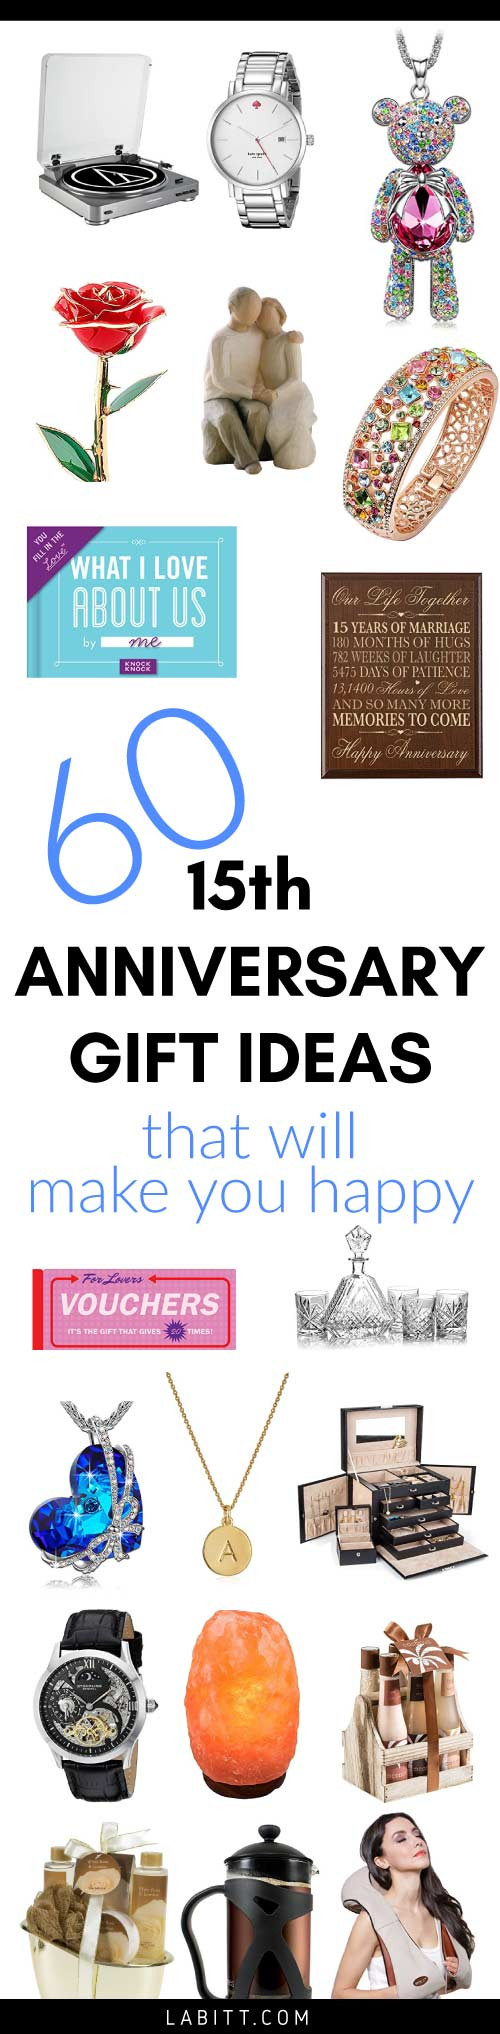 15Th Wedding Anniversary Gift Ideas For Him
 15th Wedding Anniversary Gift Ideas for Her